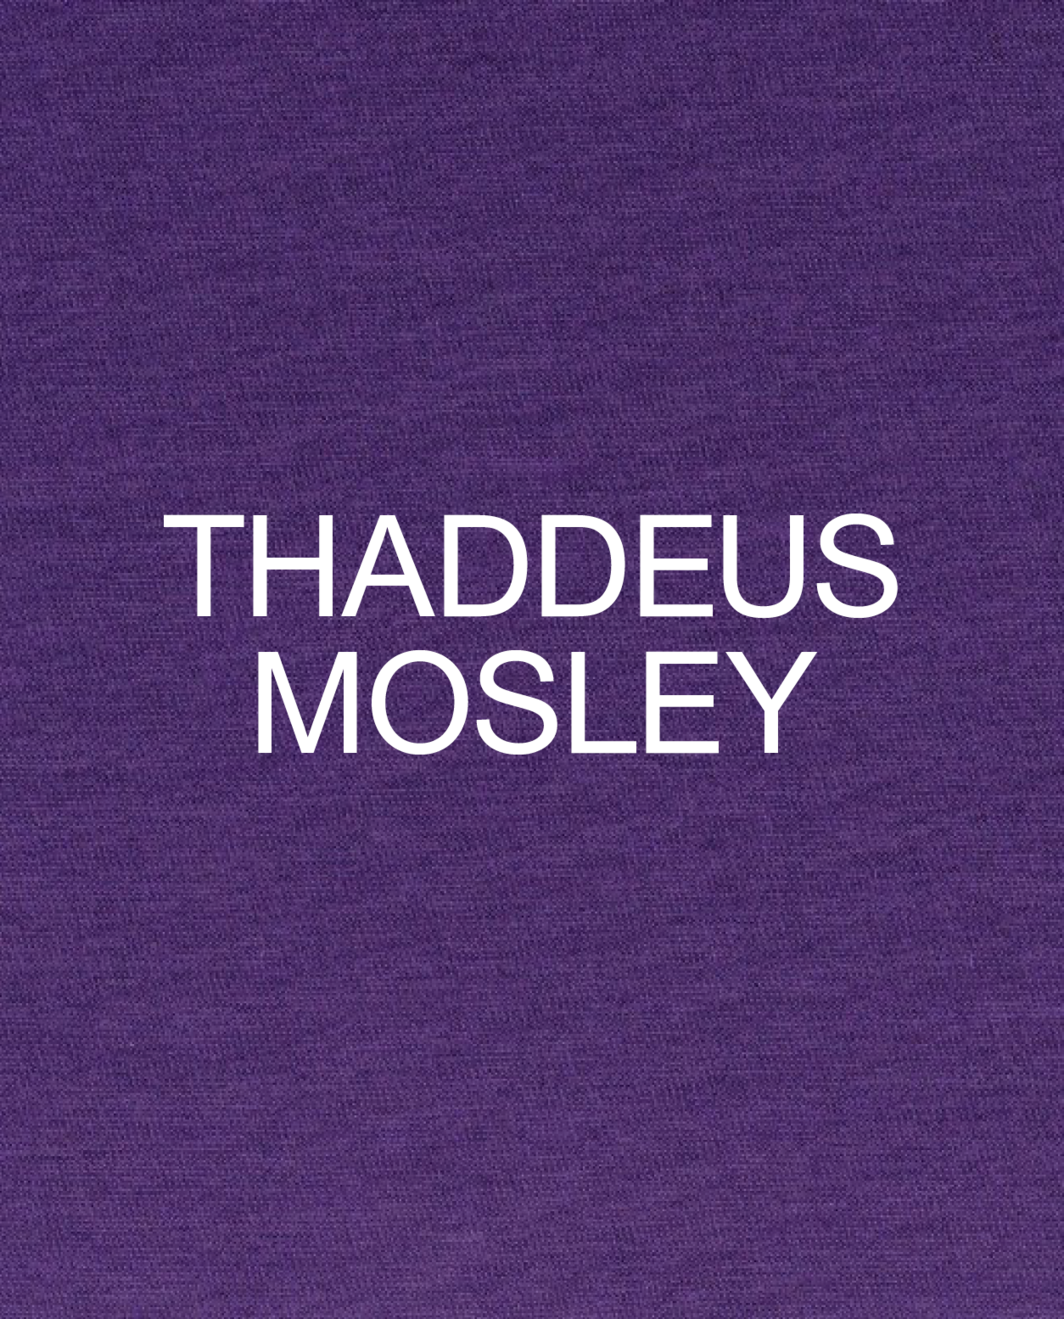 The cover of THADDEUS MOSLEY